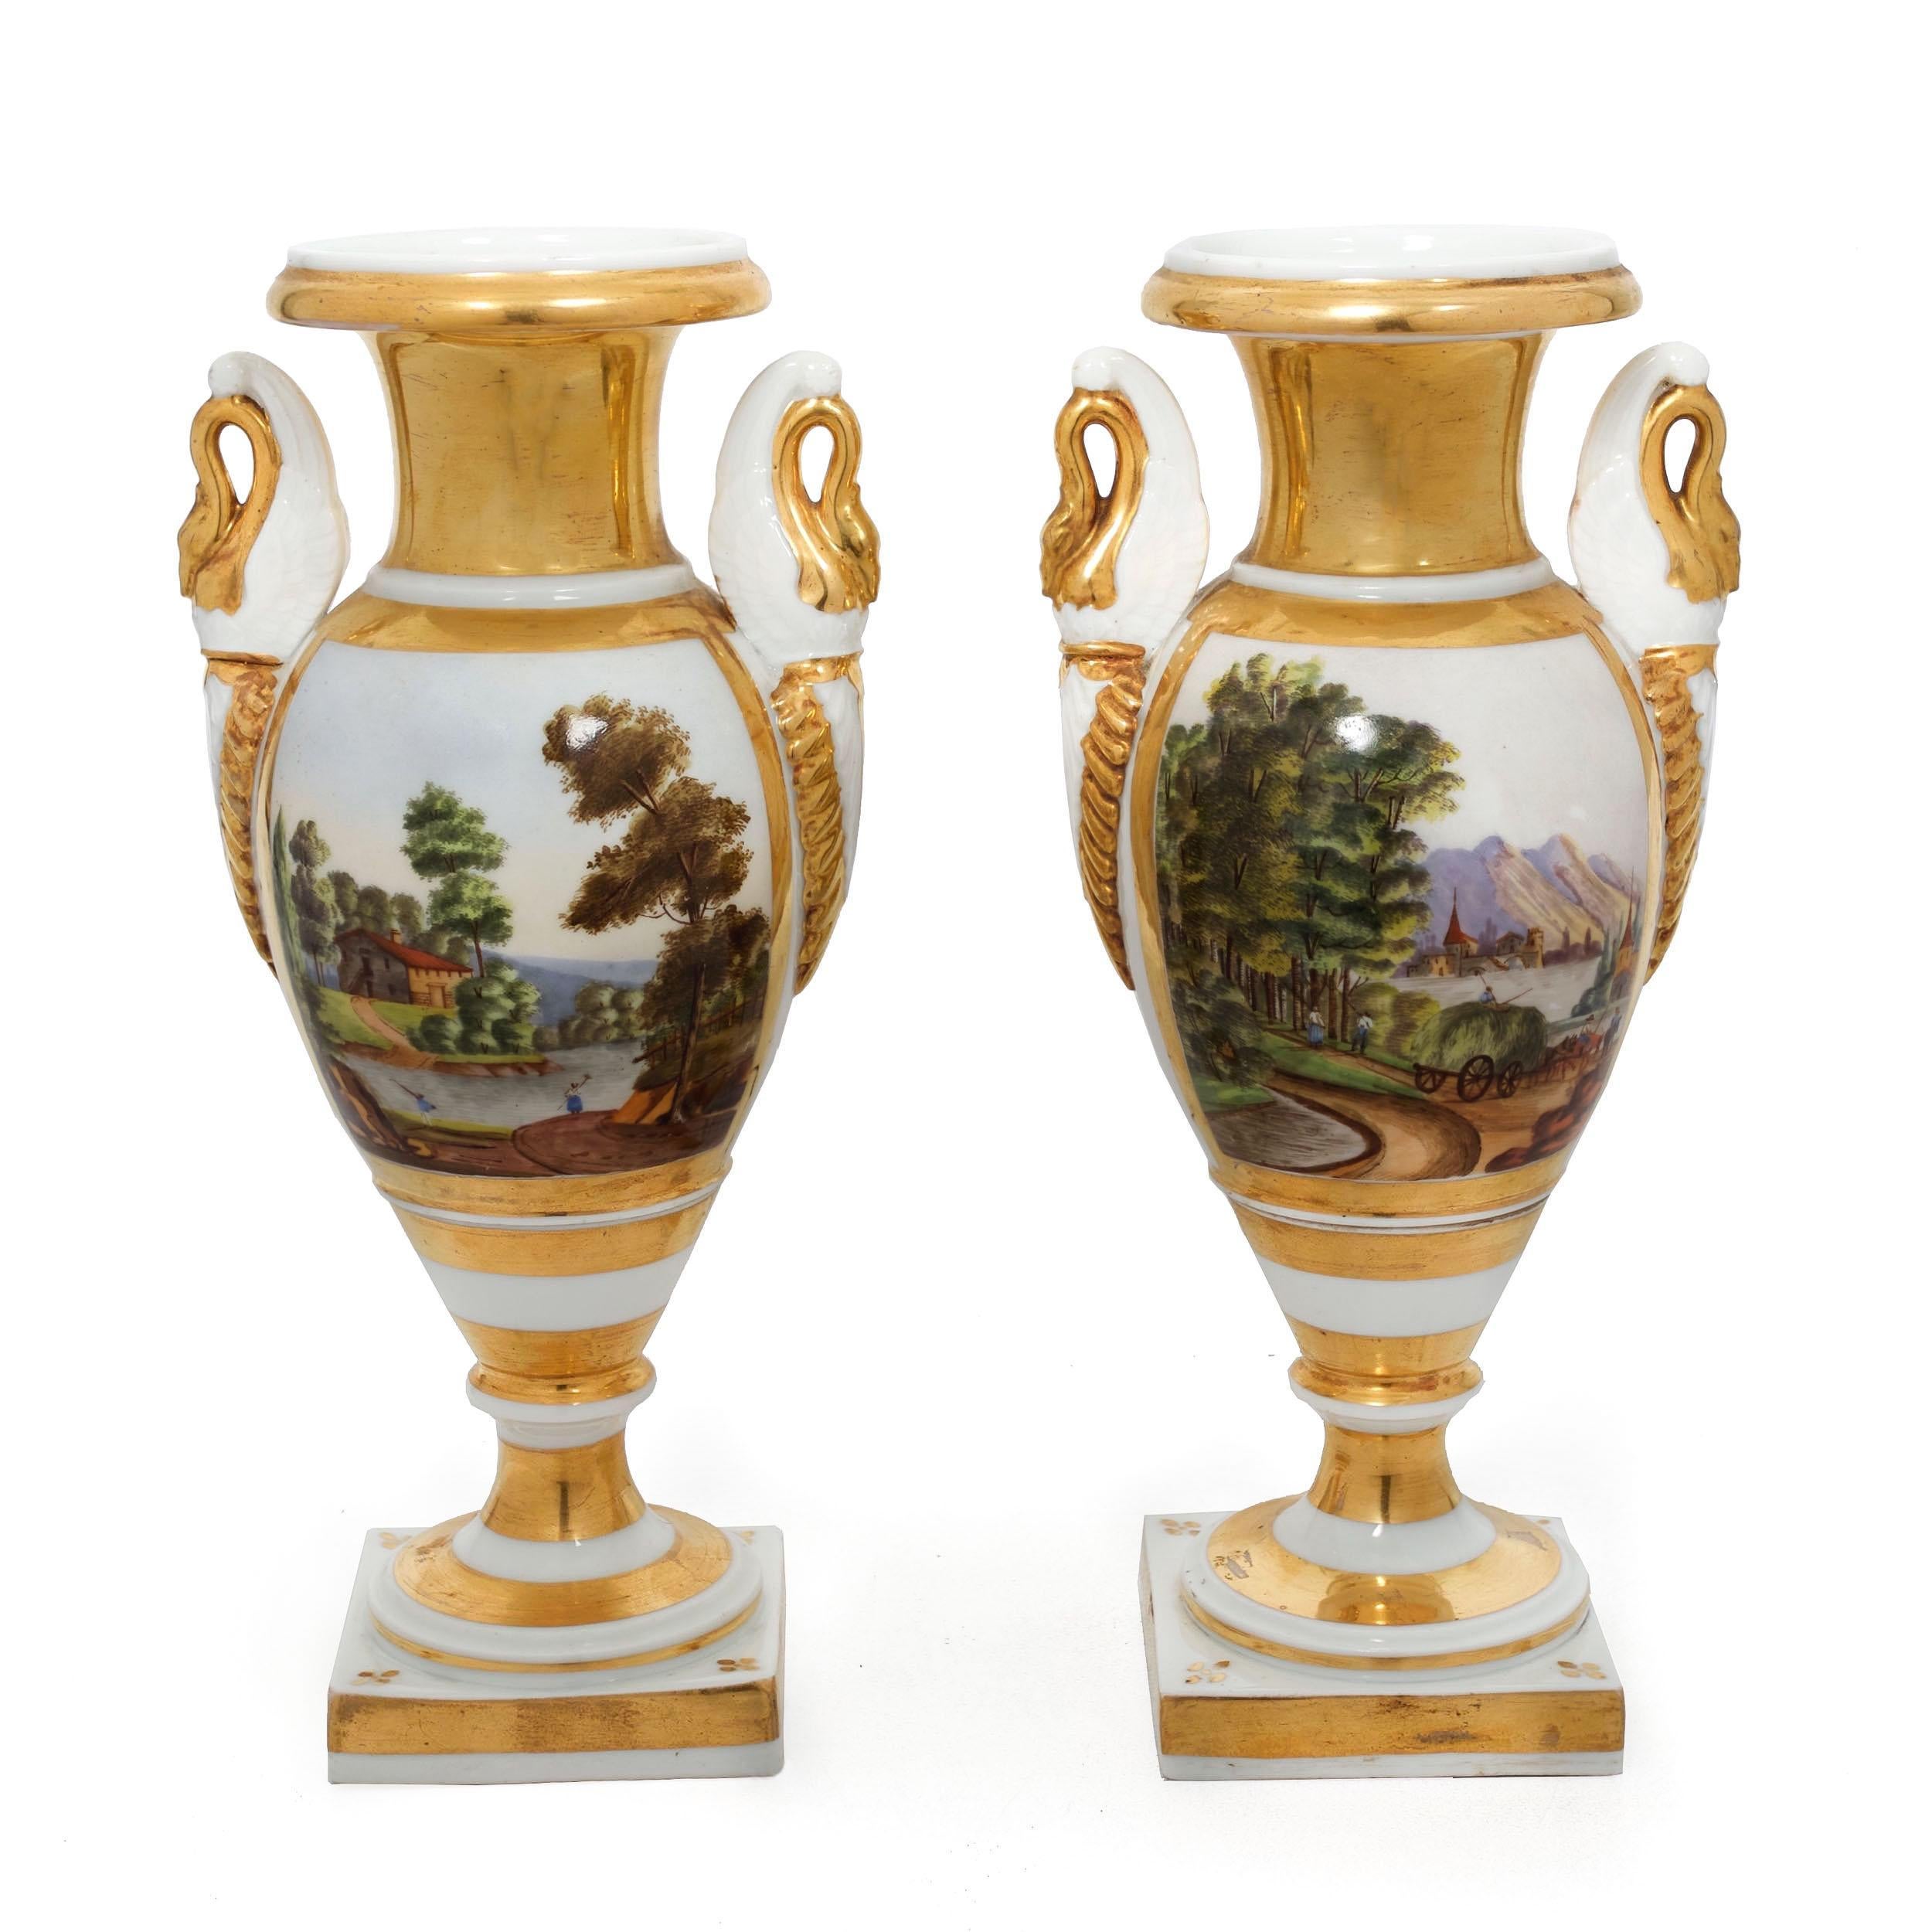 An attractive pair of 19th century parcel-gilt white-porcelain vases with painted scenes of countryside landscapes, three depicting castles and manors before various lakes and the fourth with donkeys and farmers working the grounds before a large